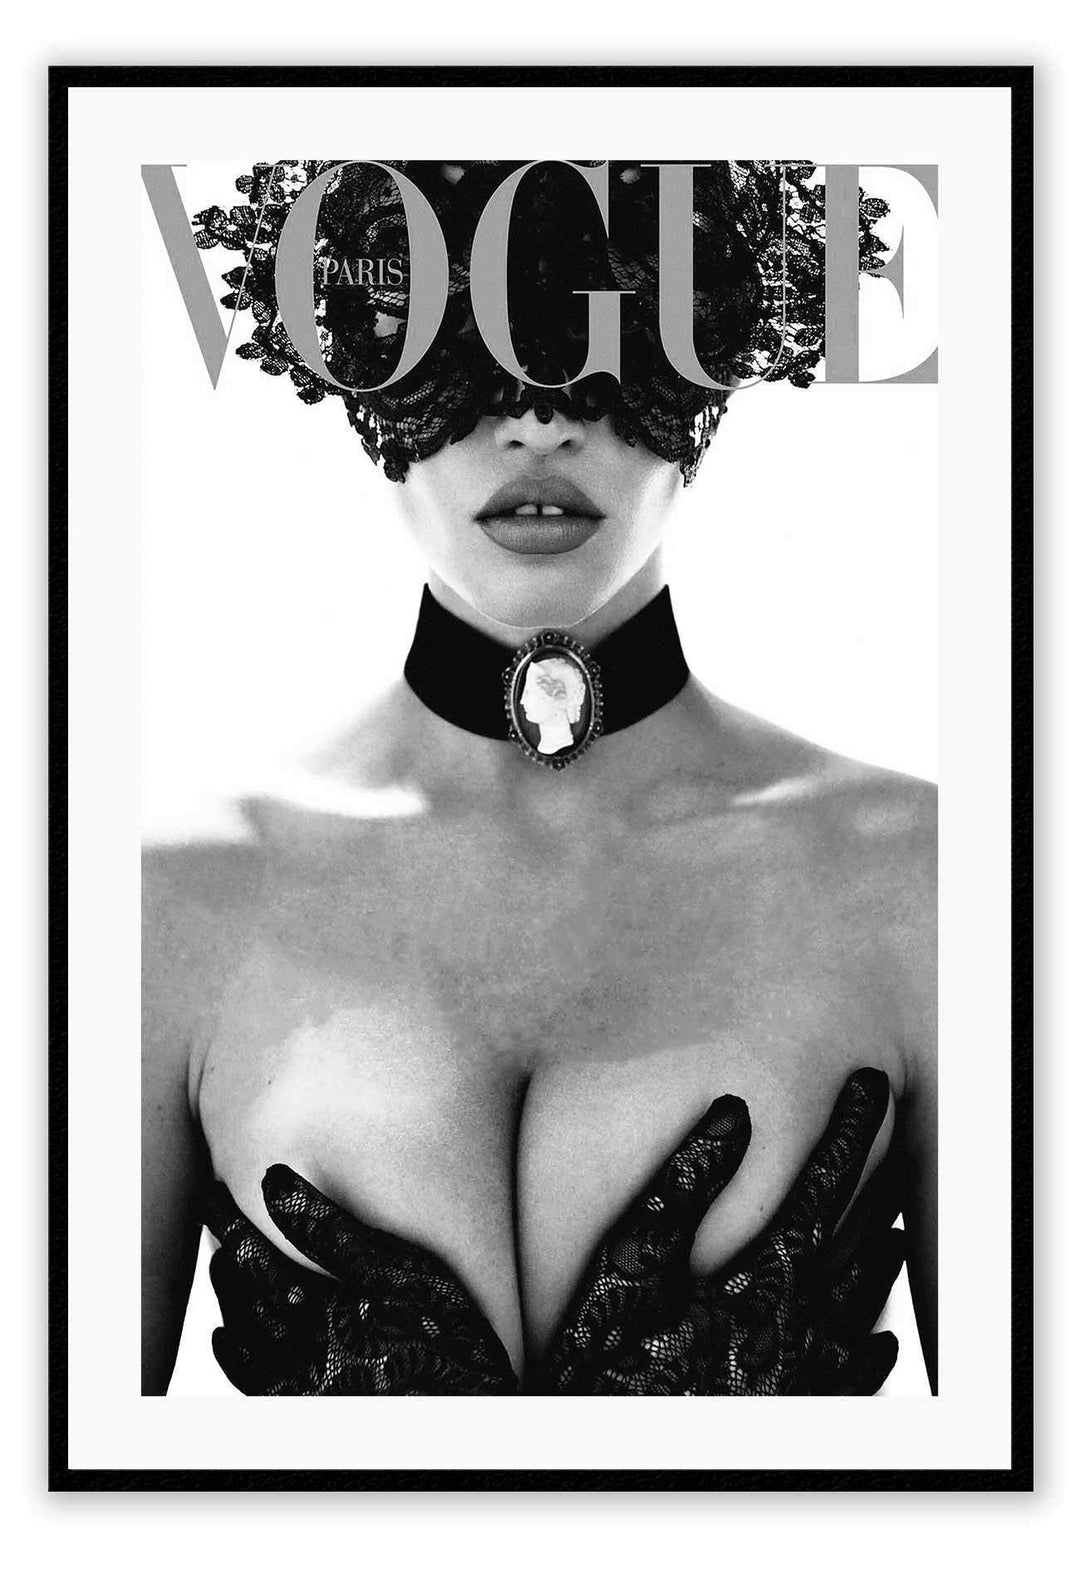 Canvas Print Small		50x70cm / Black Vogue Lace Vogue Lace FLara Stone in the cover of the 90th Anniversary of Vogue - Framed Print - Vogue Lace - Canvas Home Interiors ramed Brand